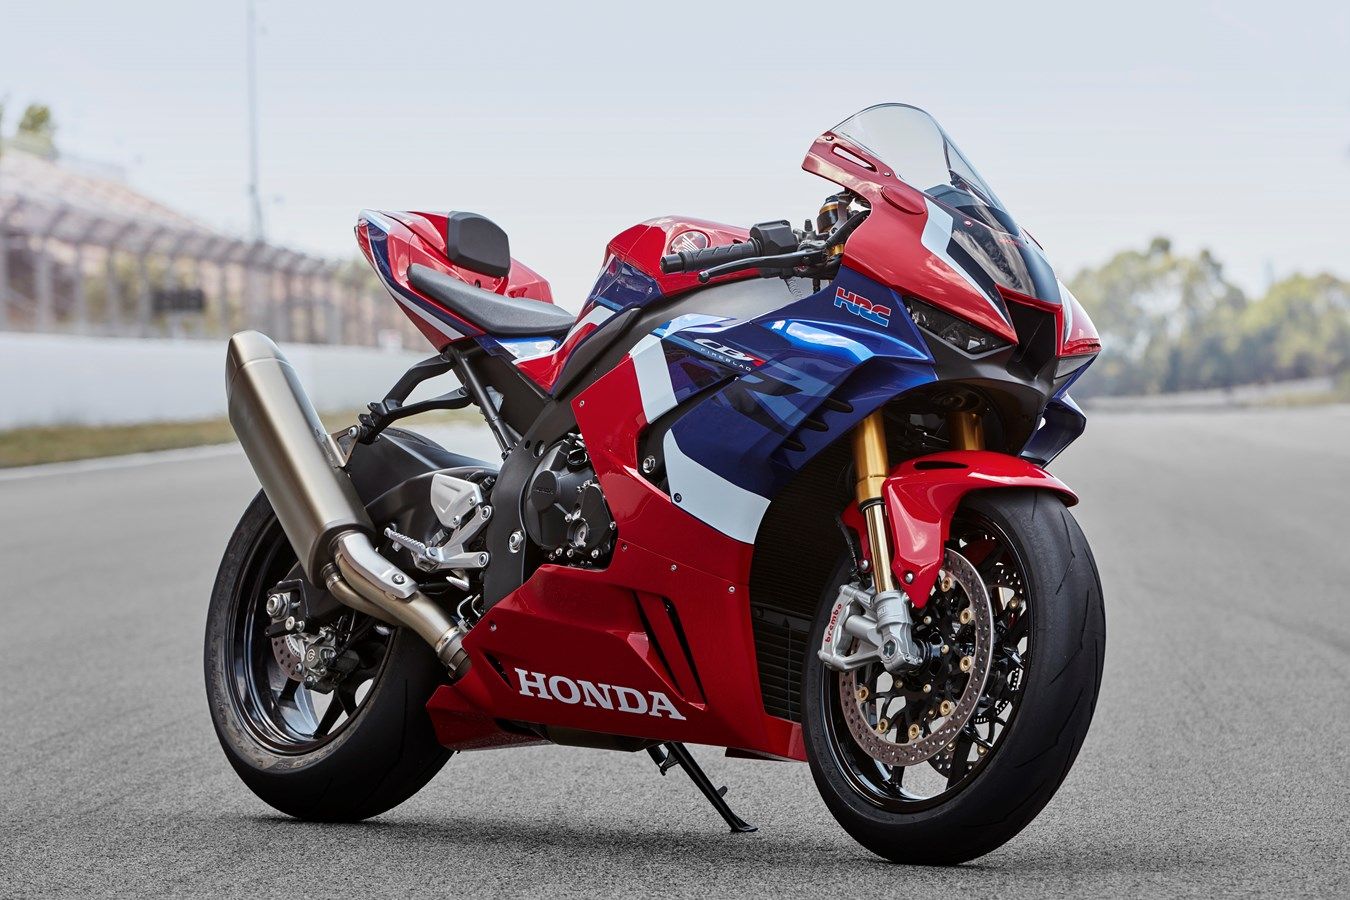 2020 Honda CBR1000RR-R Bookings Commence In India